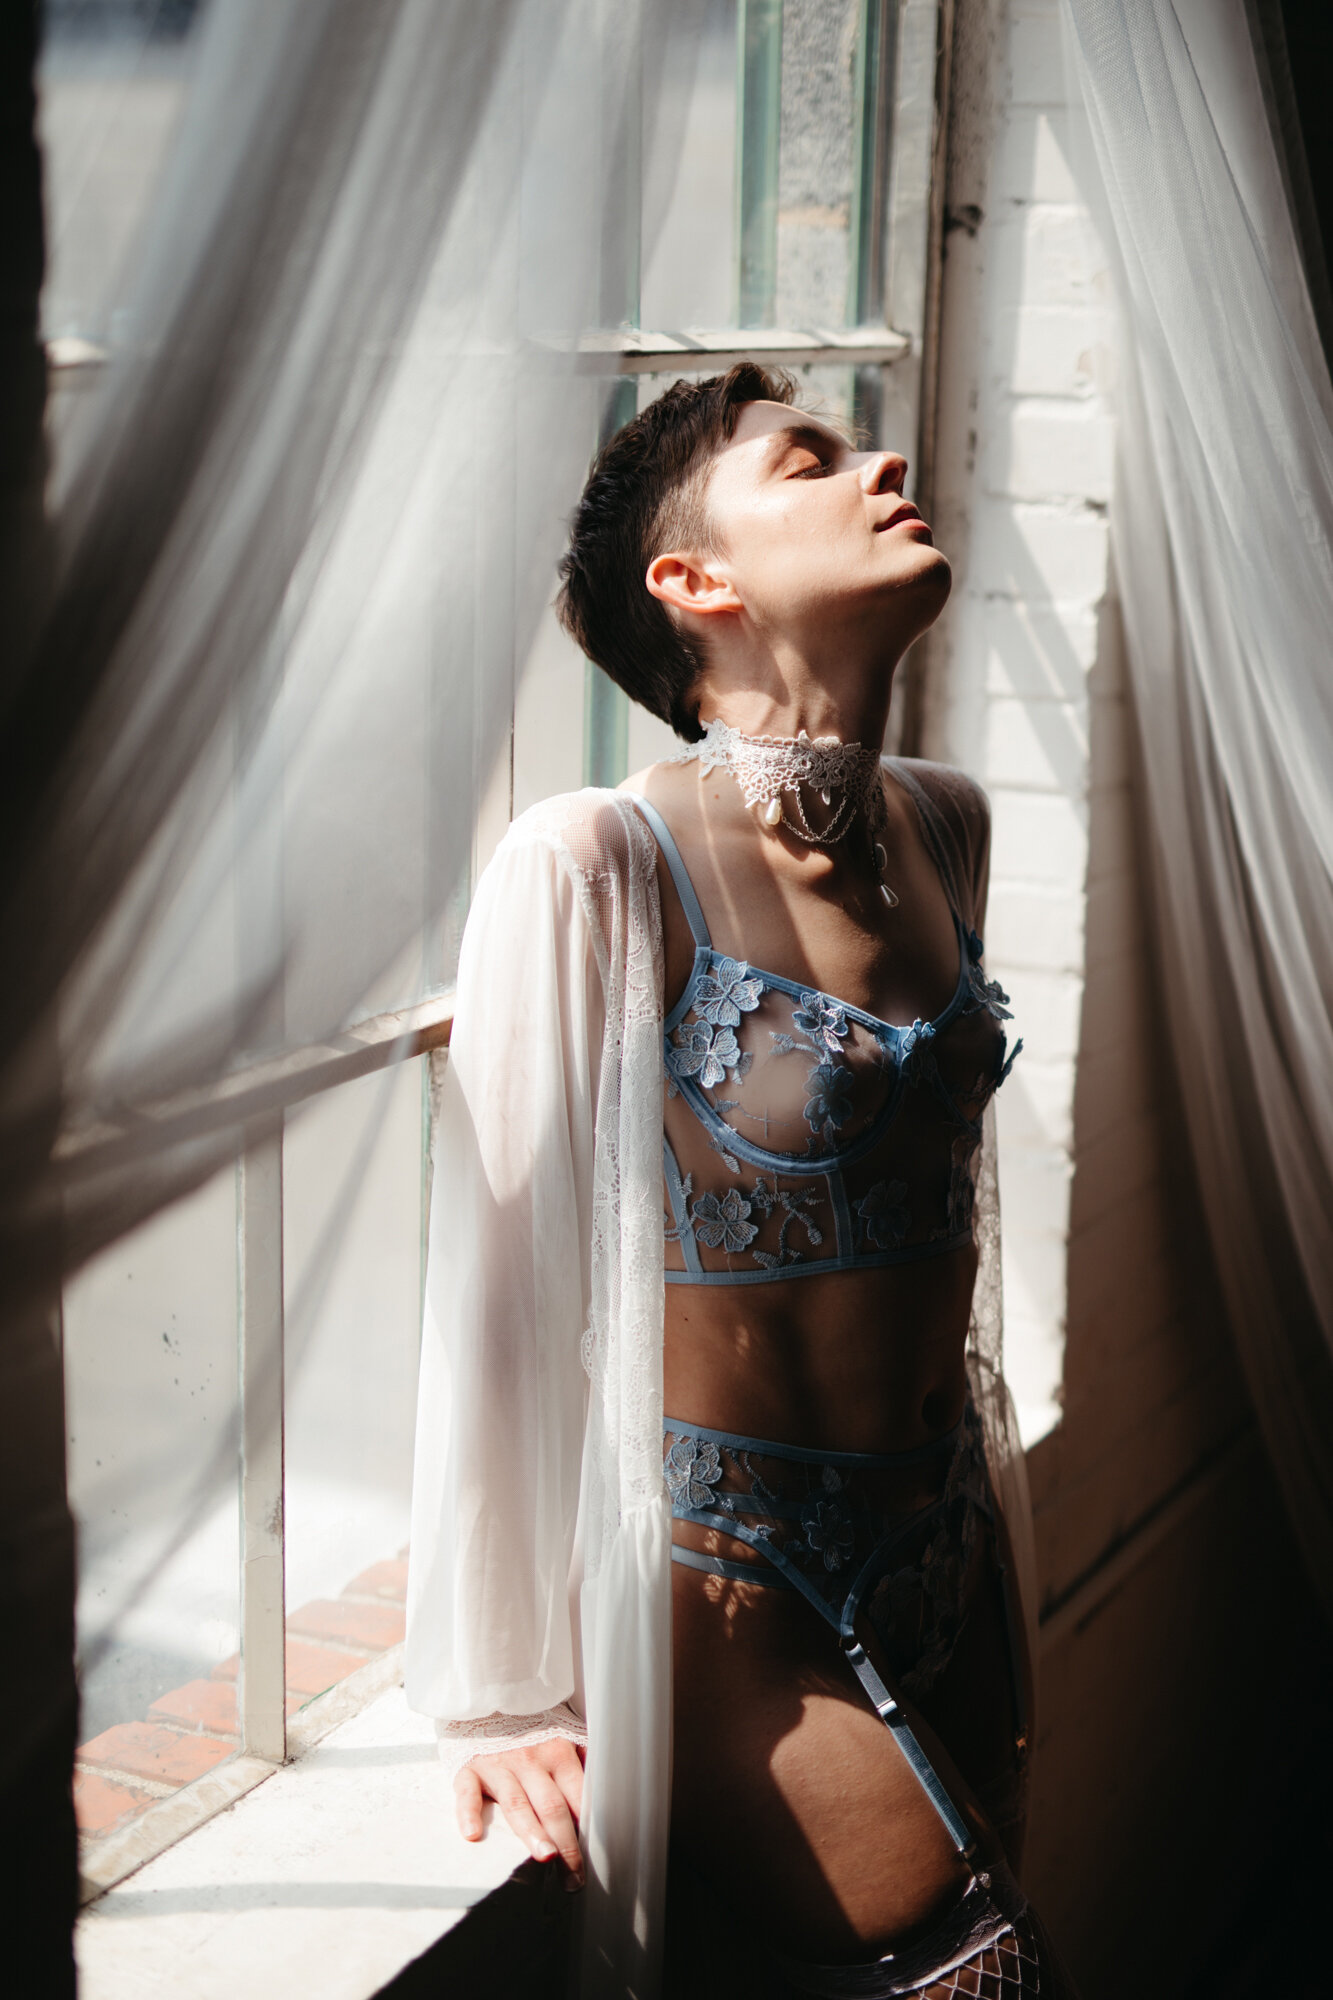 Genderqueer person with short hair sitting in a window wearing blue lingerie set